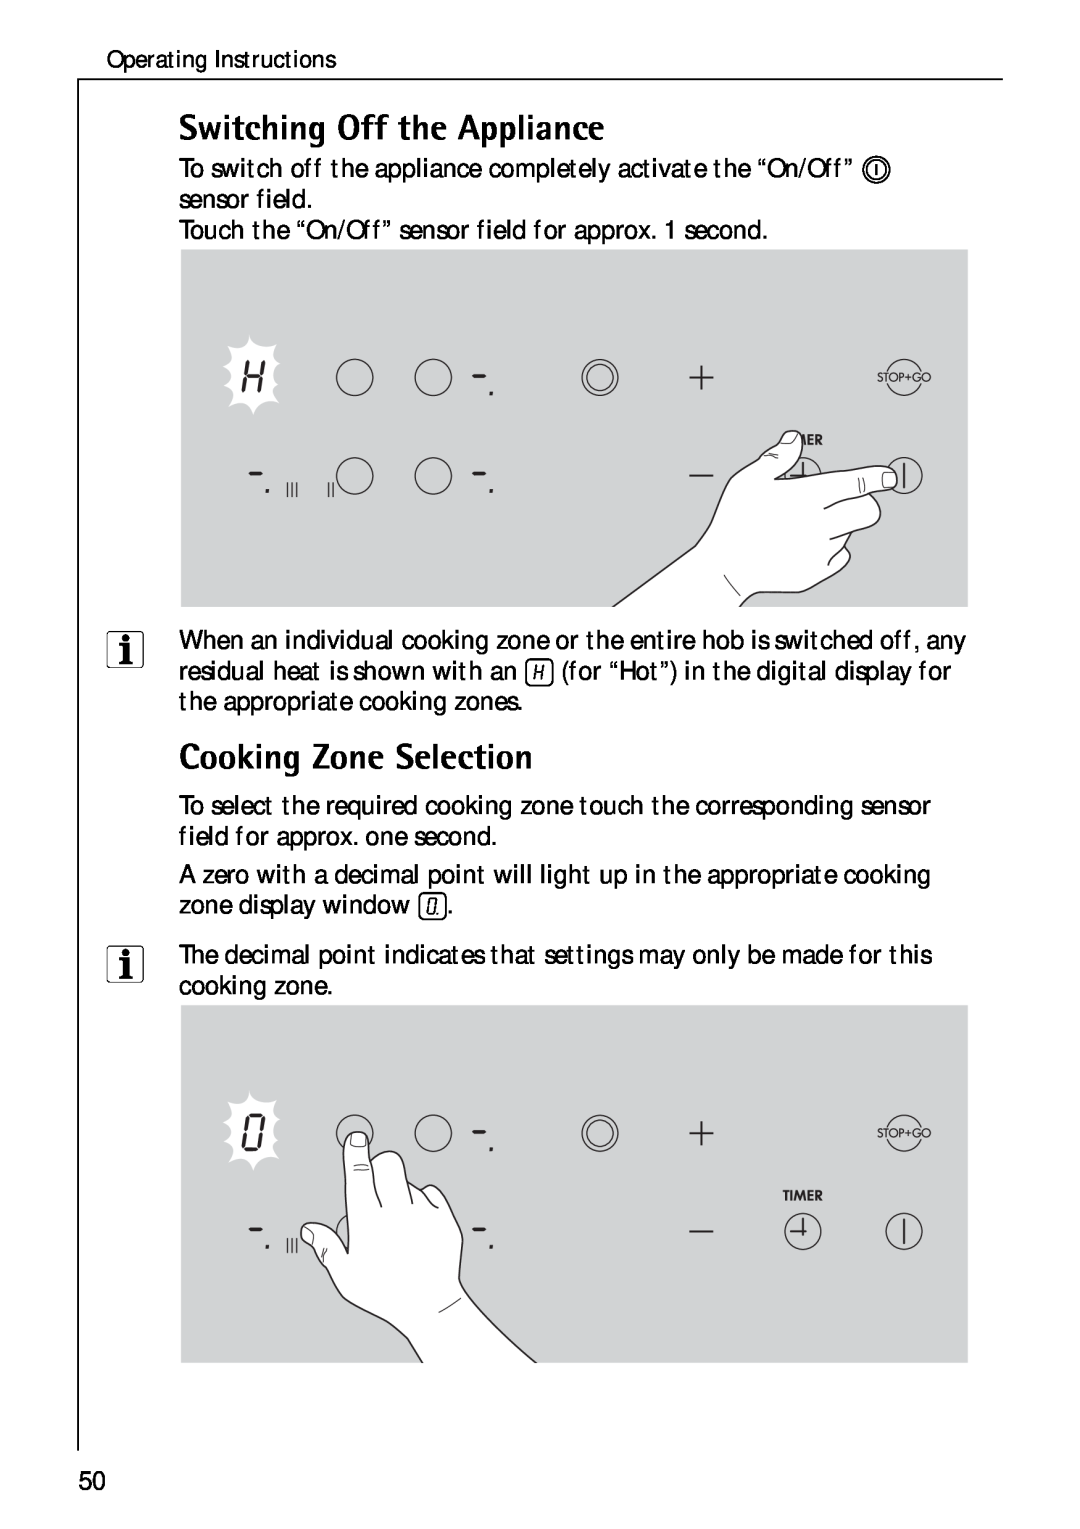 Electrolux C75301K operating instructions Switching Off the Appliance, Cooking Zone Selection 